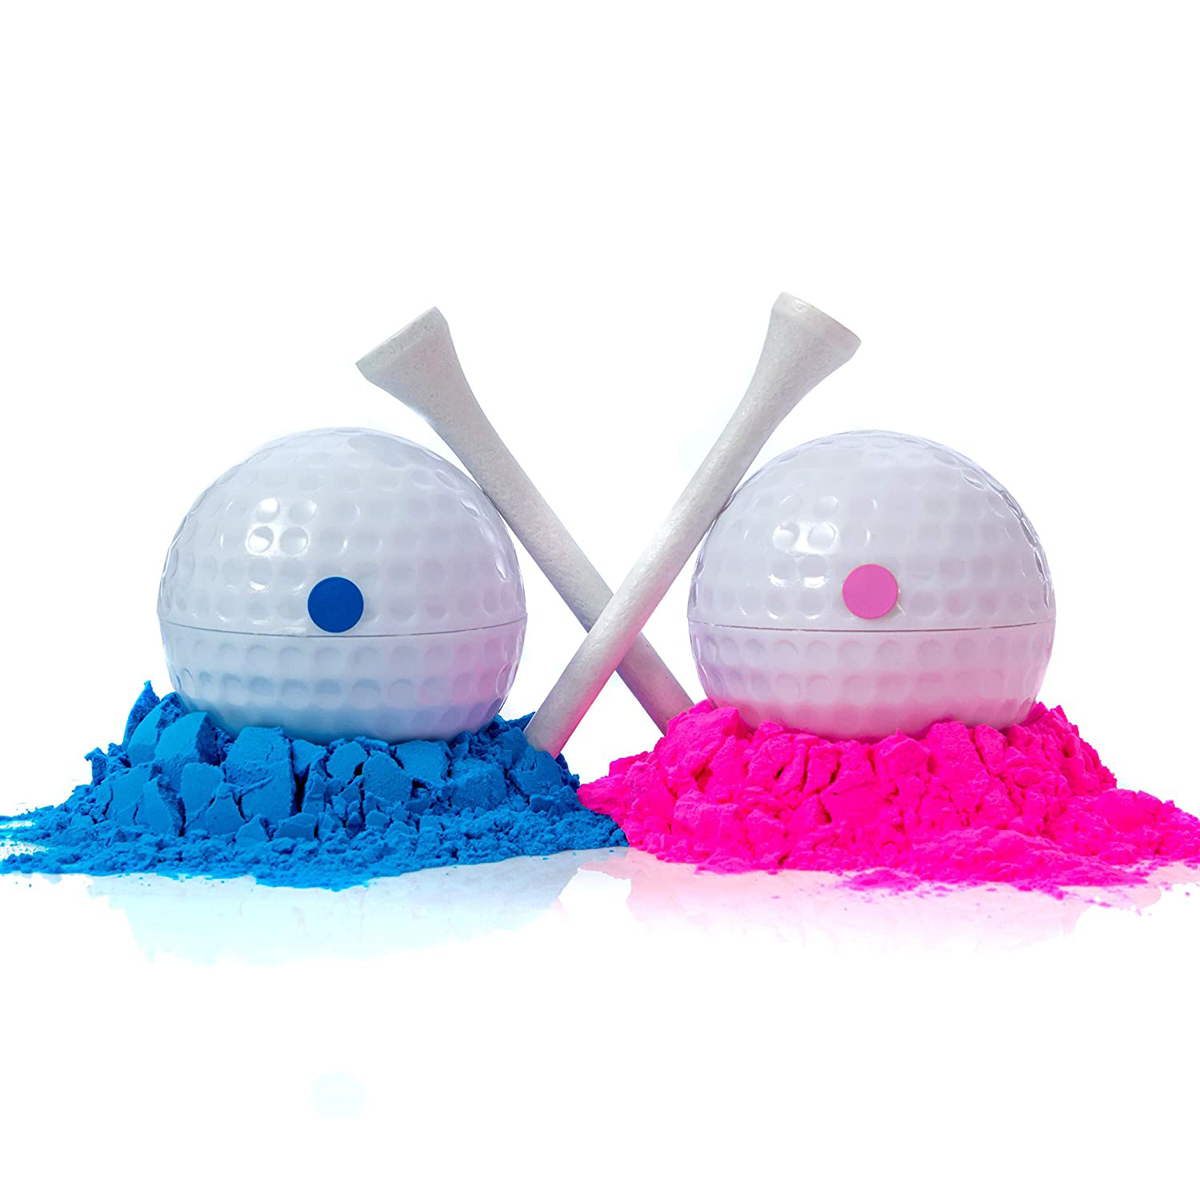 Gender Reveal Golf Ball for the Big Reveal